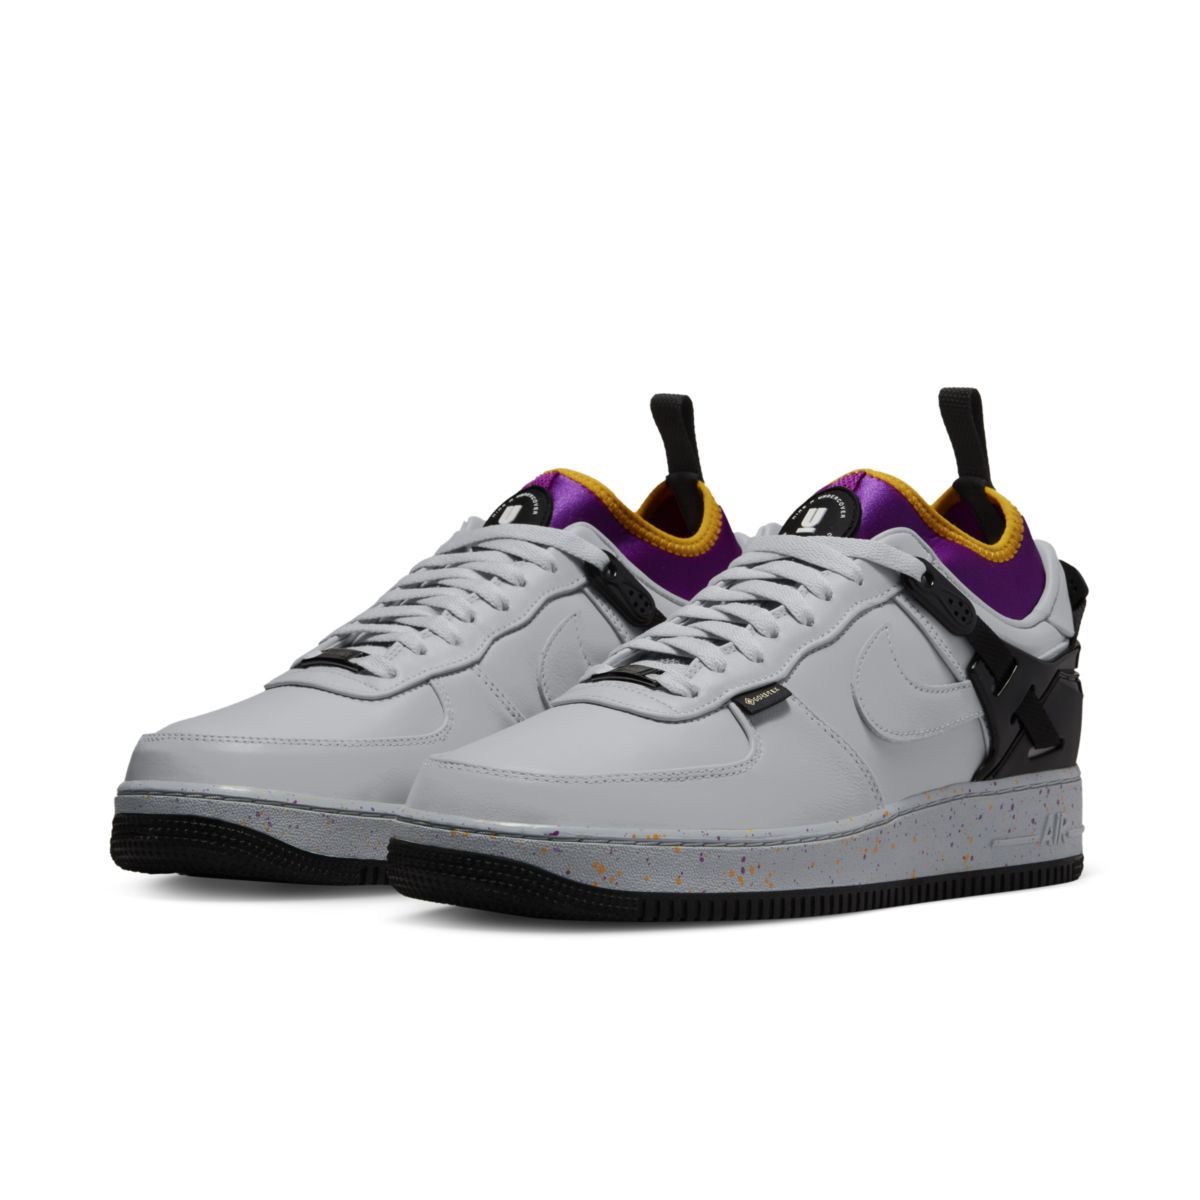 Undercover x Nike Air Force 1 Low Grey Fog DQ7558-001 4